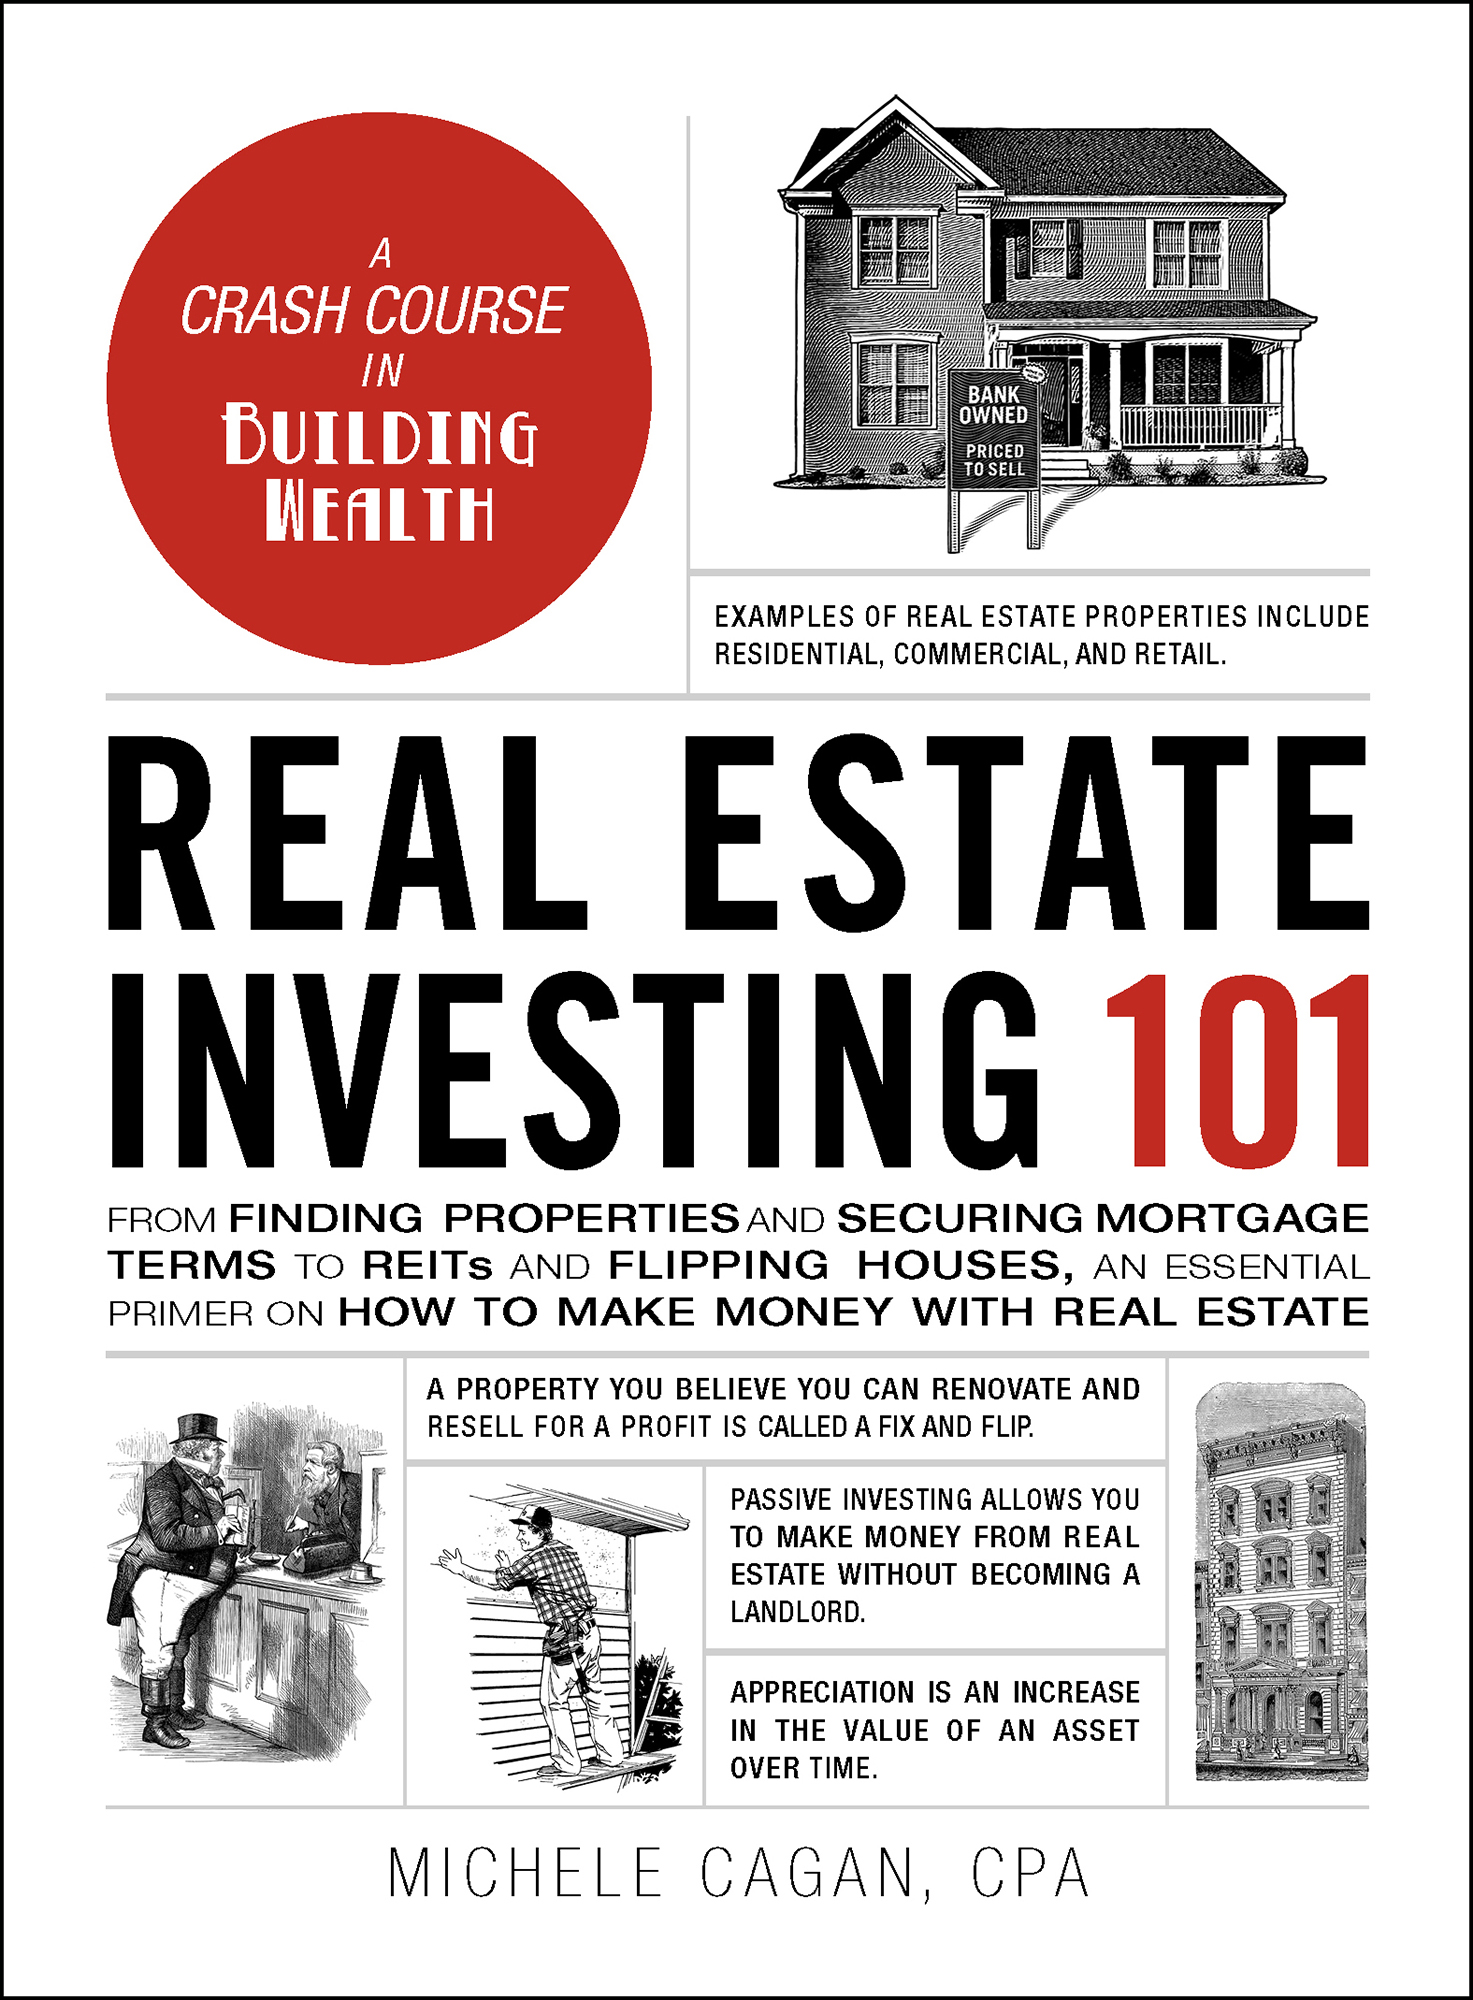 Real Estate Investing 101 From Finding Properties and Securing Mortgage Terms to REITs and Flipping Houses an Essential Primer on How to Make Money with Real Estate - image 1